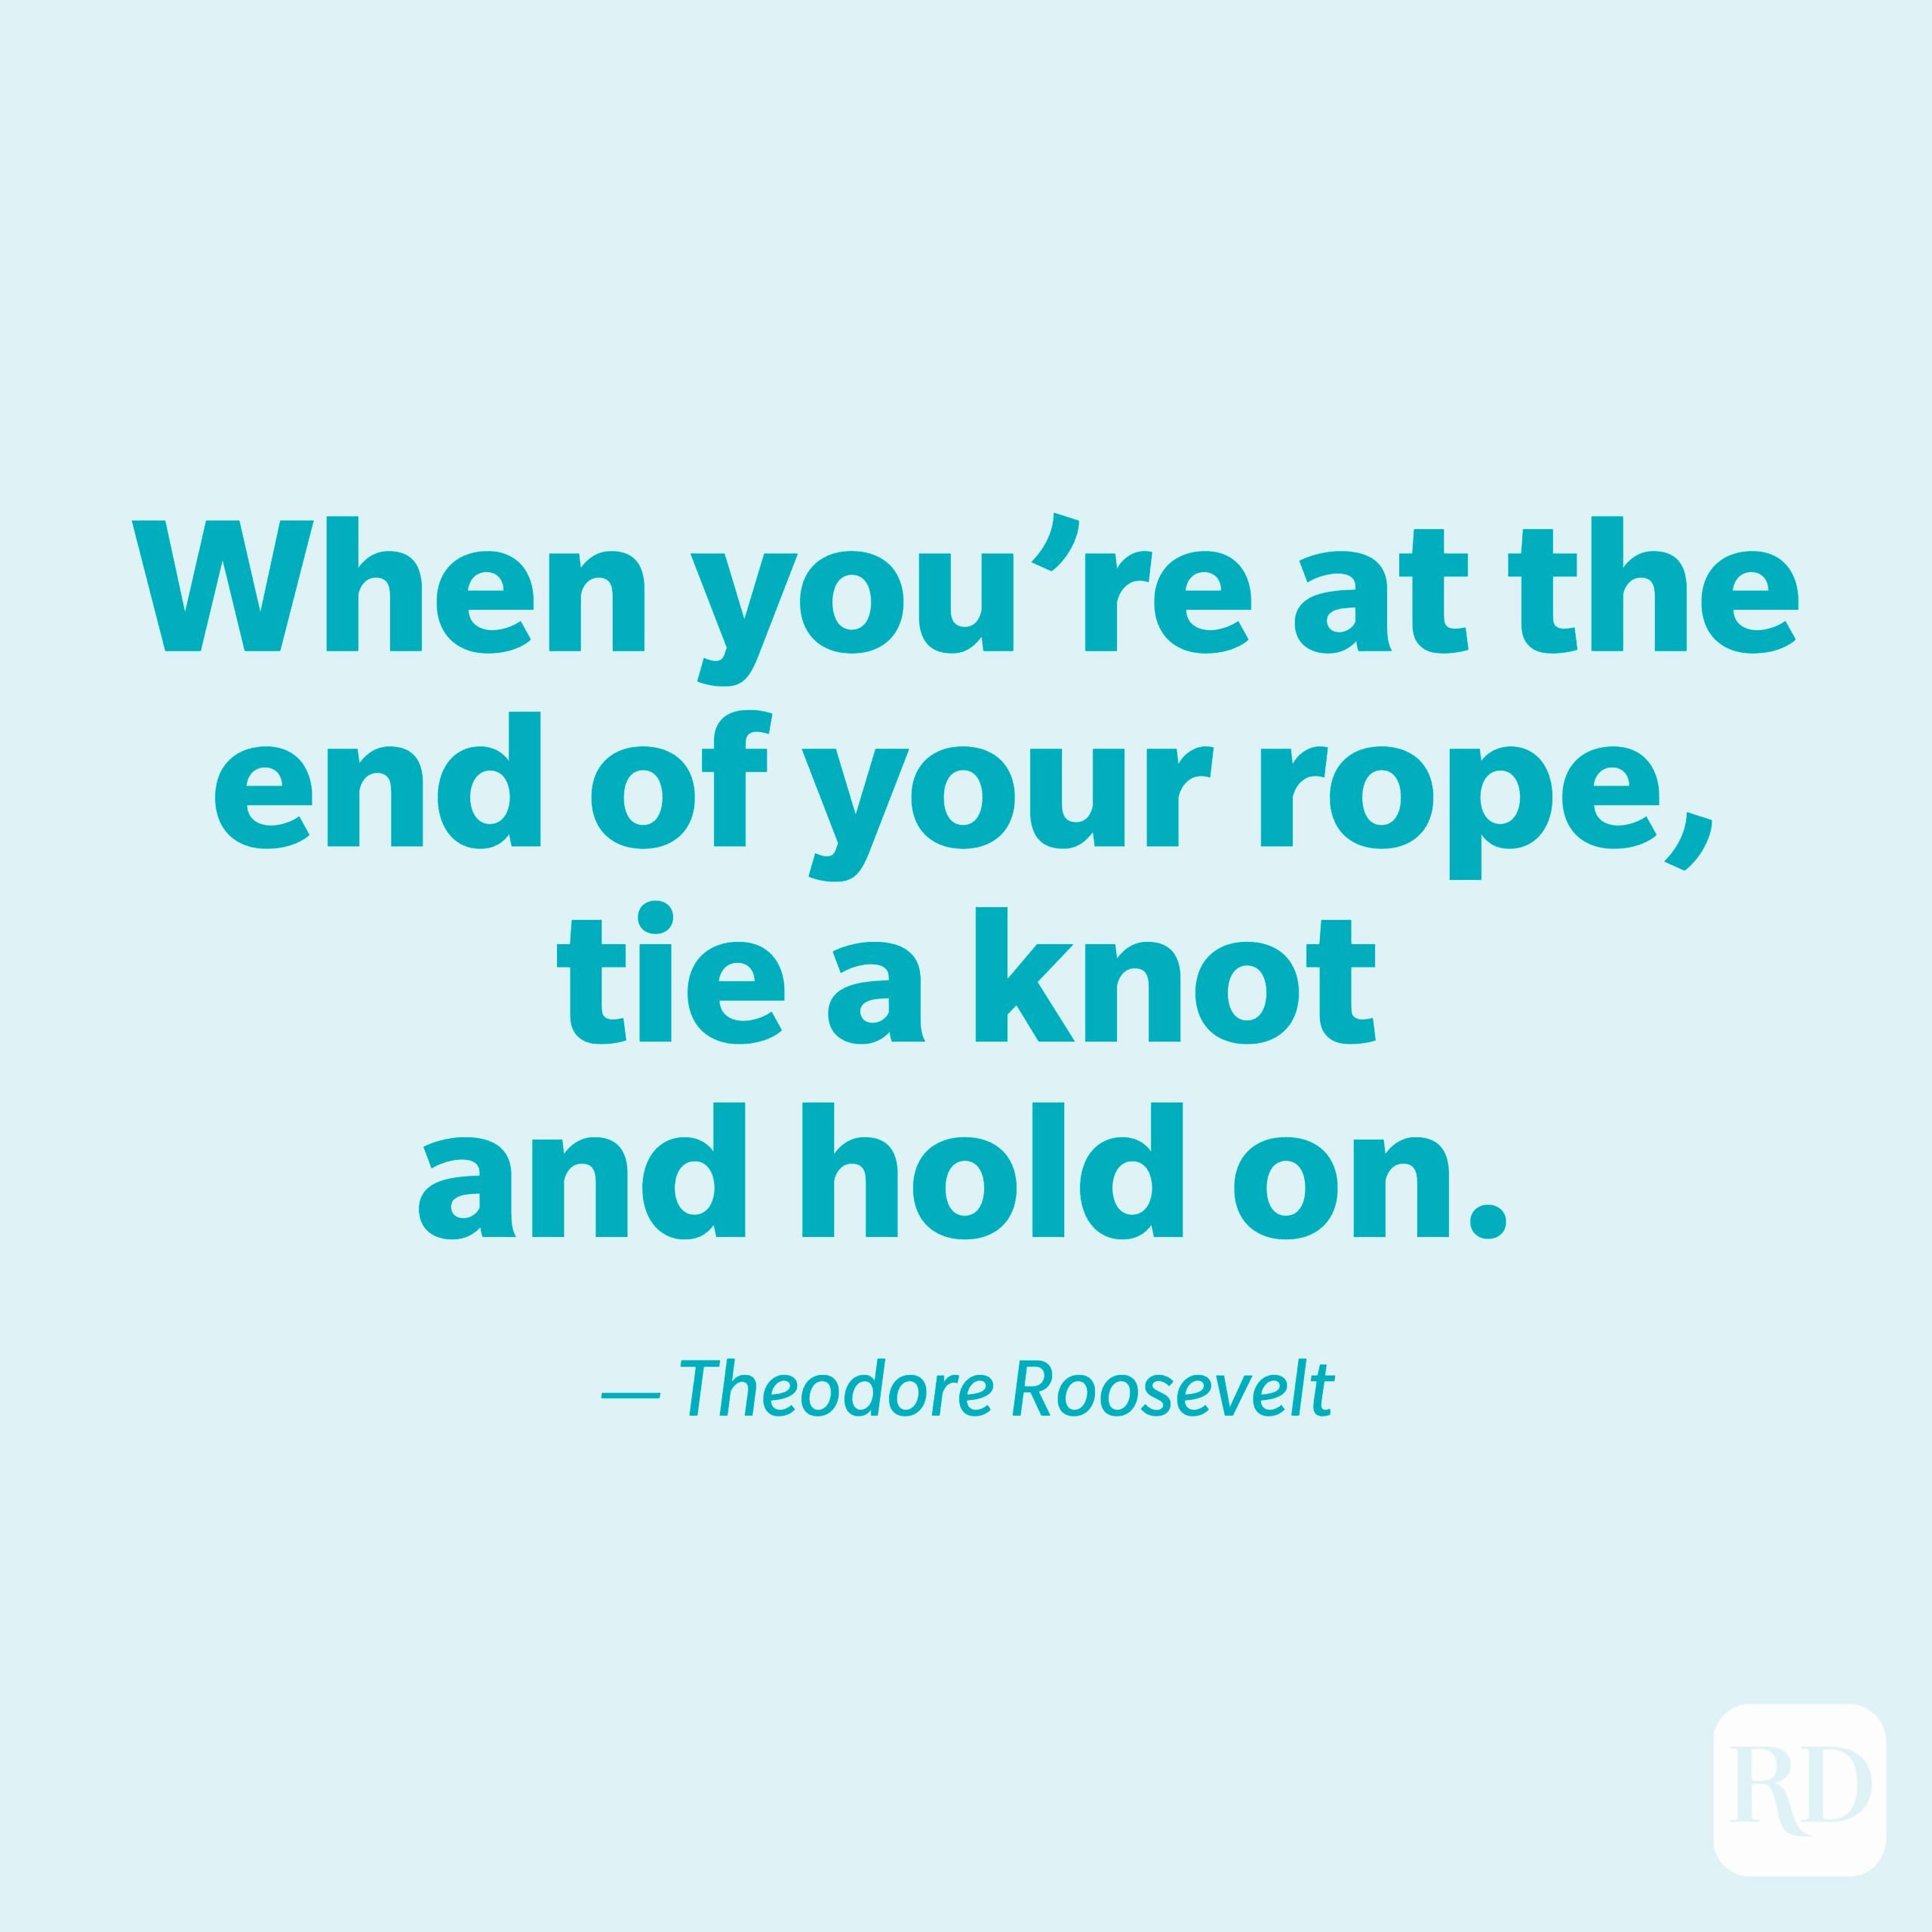 "When you're at the end of your rope, tie a knot and hold on." —Theodore Roosevelt.